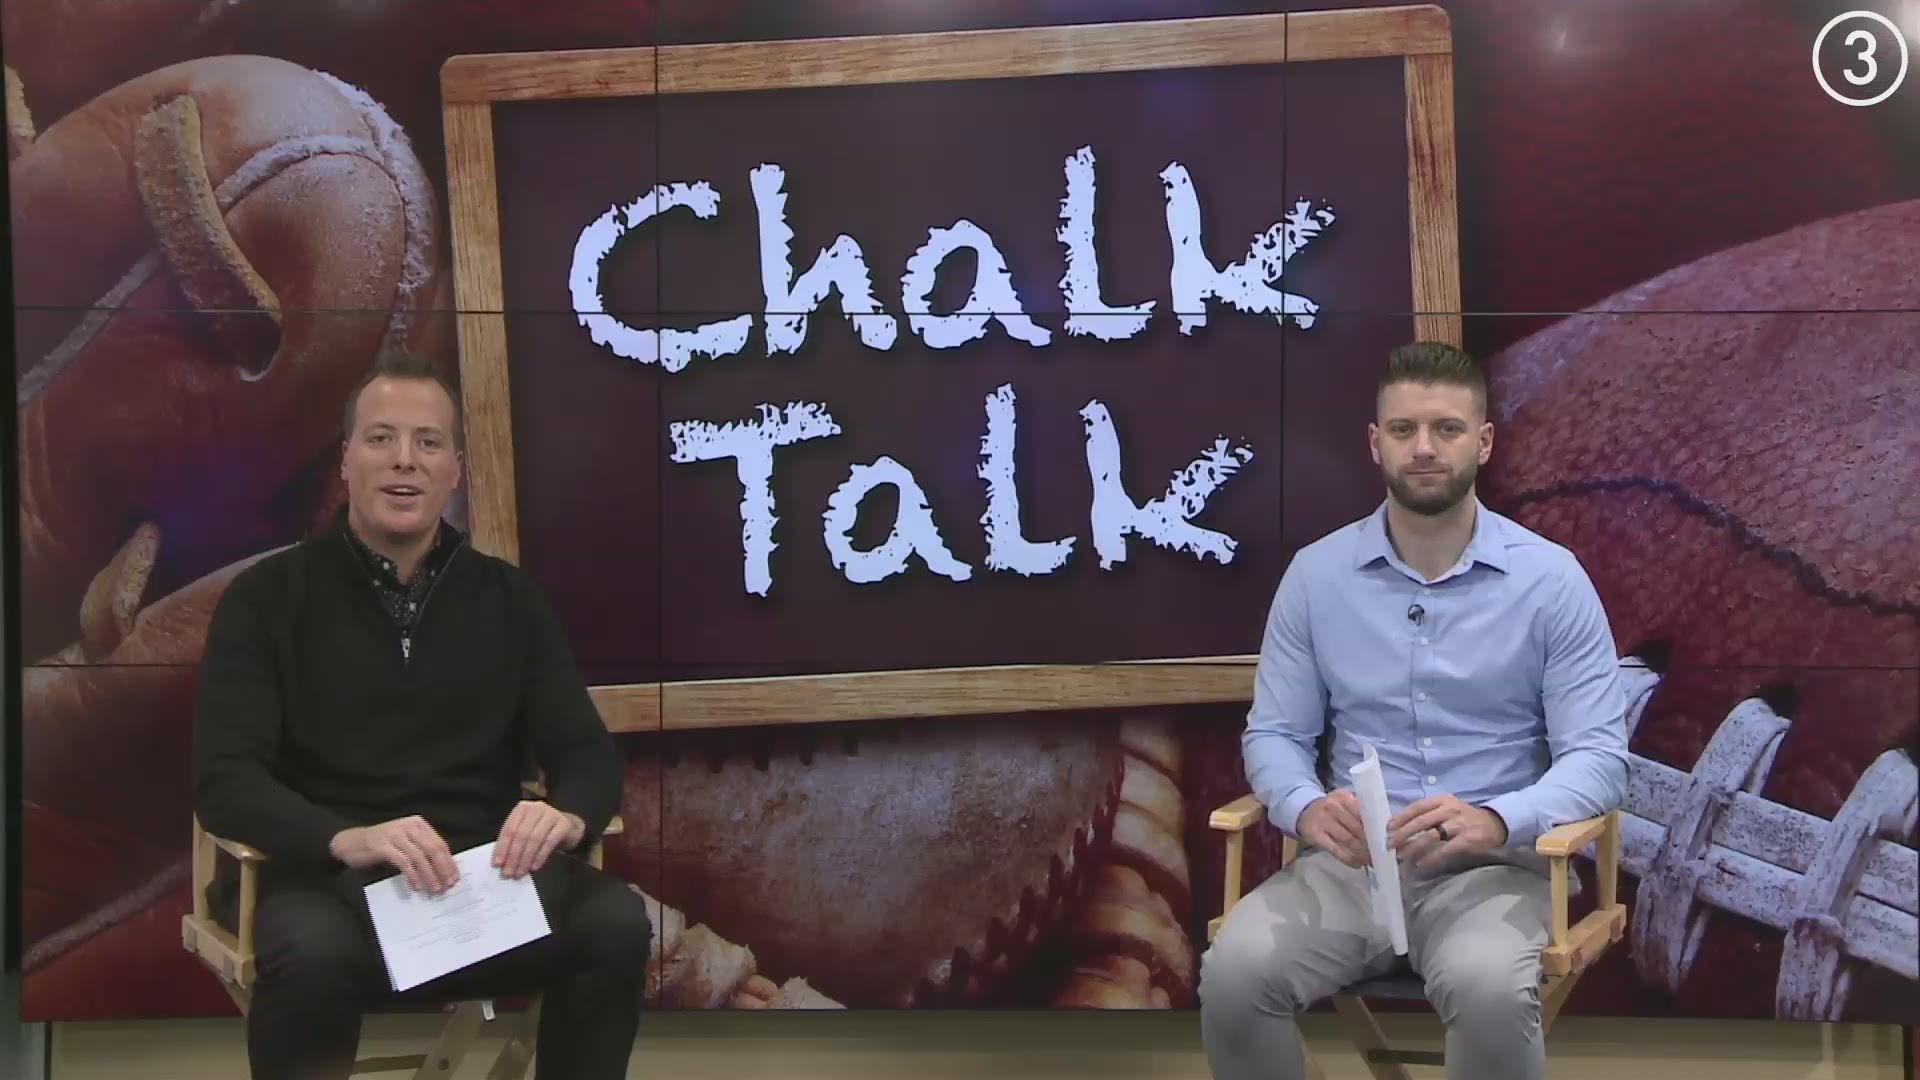 On the 12th episode of WKYC's Chalk Talk, Nick Camino and Ben Axelrod discuss and make their picks for Week 13 of the college football season and Week 12 of the NFL.